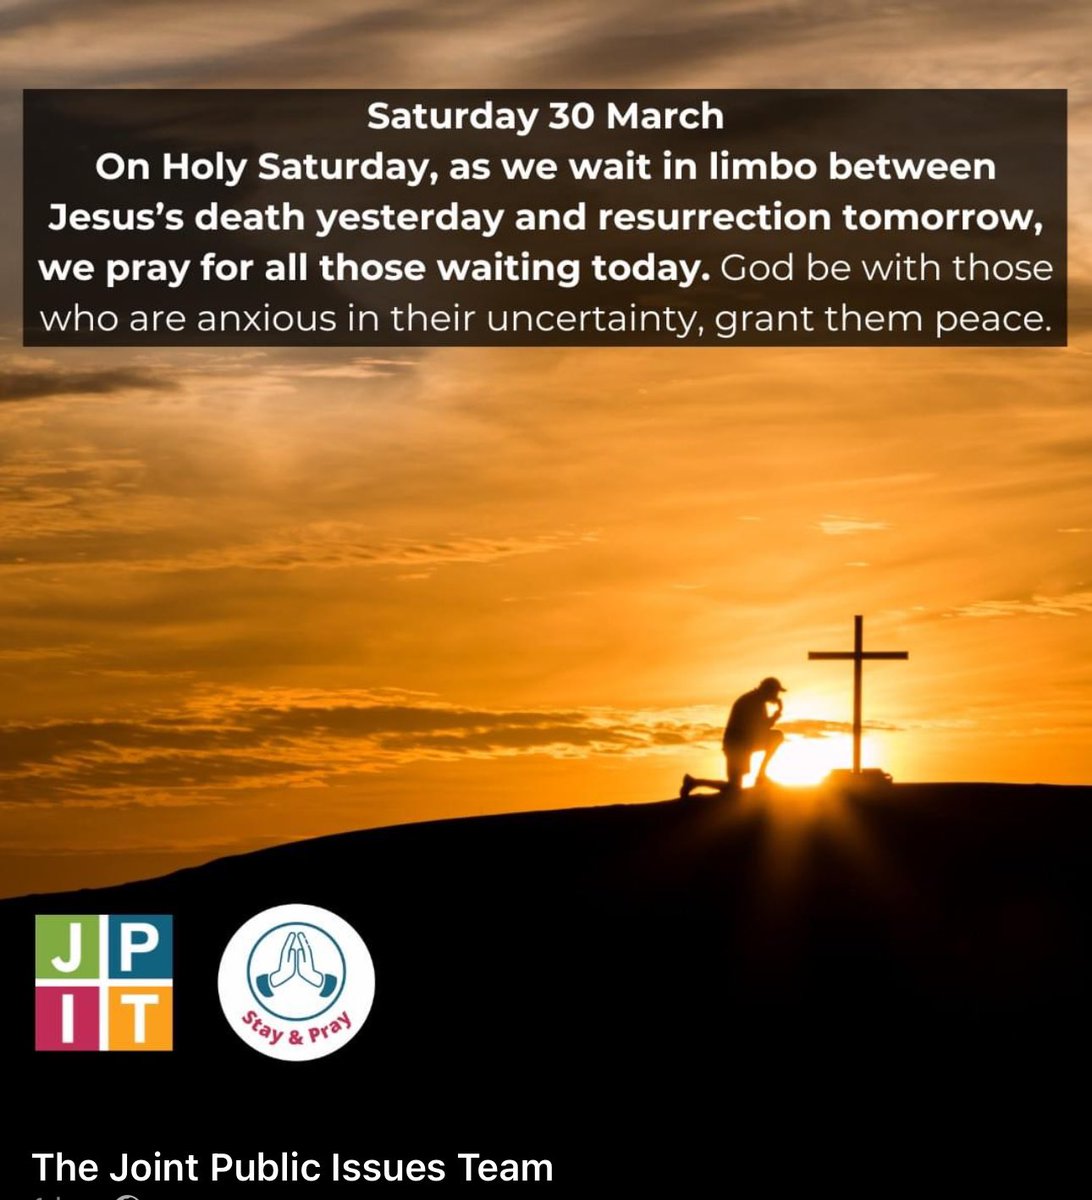 On Holy Saturday, as we wait in limbo between Jesus’s death yesterday and resurrection tomorrow, we pray for all those waiting today. God be with those who are anxious in their uncertainty, grant them peace. #StayandPray Read more: churchofscotland.org.uk/news-and-event…